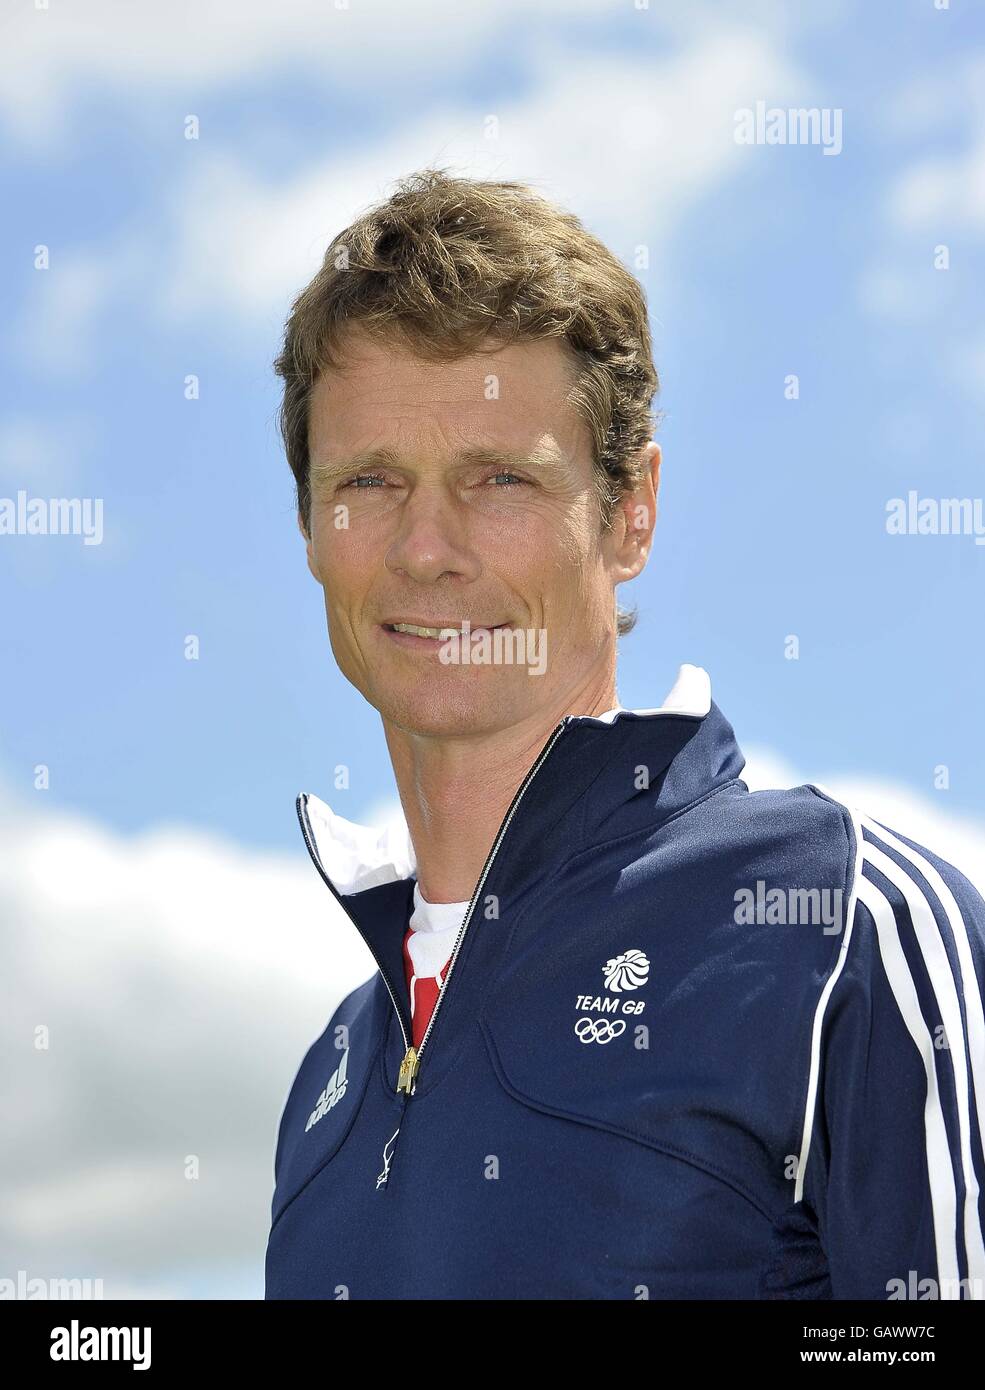 Chippenham, Wiltshire, UK. 05th July, 2016. William Fox-Pitt, age 47, based Dorset, with Christopher Stone’s Chilli Morning. TeamGB announce the equestrian team for the Rio2016 Olympics. The old bull pen. Chippenham. Wiltshire. UK. 05/07/2016. Credit:  Sport In Pictures/Alamy Live News Stock Photo